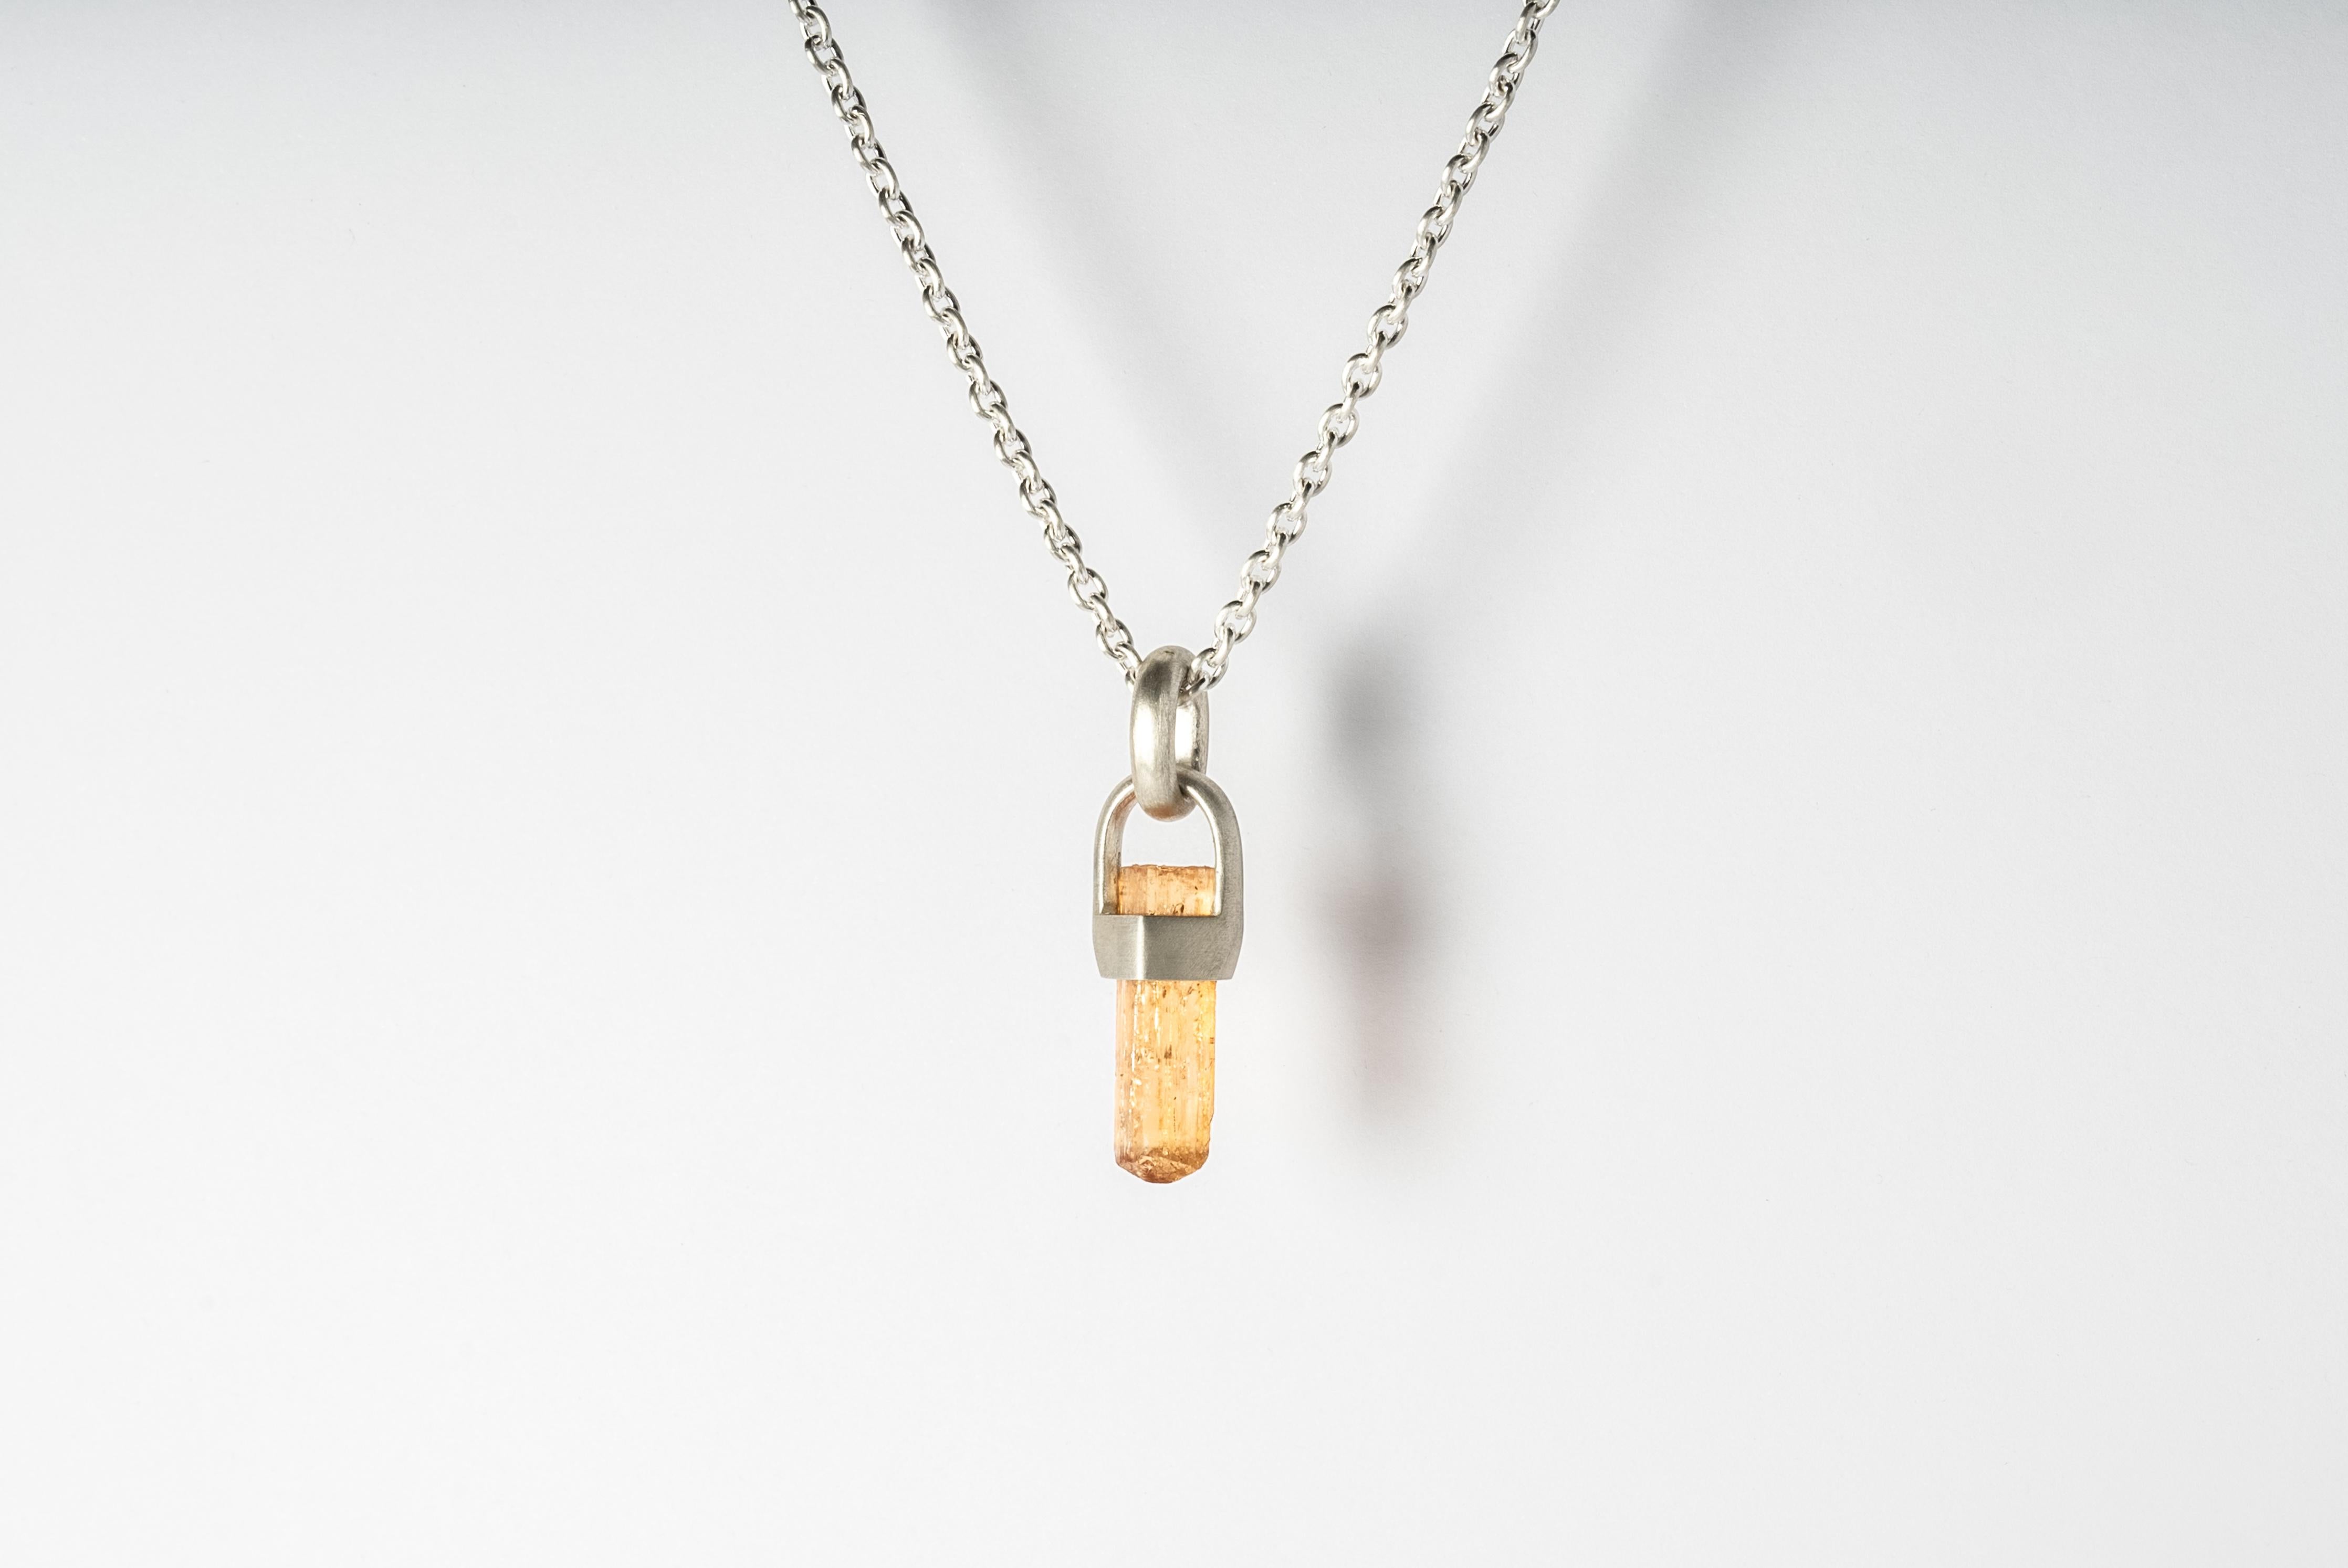 Necklace in matte sterling silver and a rough of imperial topaz. The Talisman series is an exploration into the power of natural crystals. Tools for Magic. The crystals used in these pieces are discovered through adventure and are hand selected.